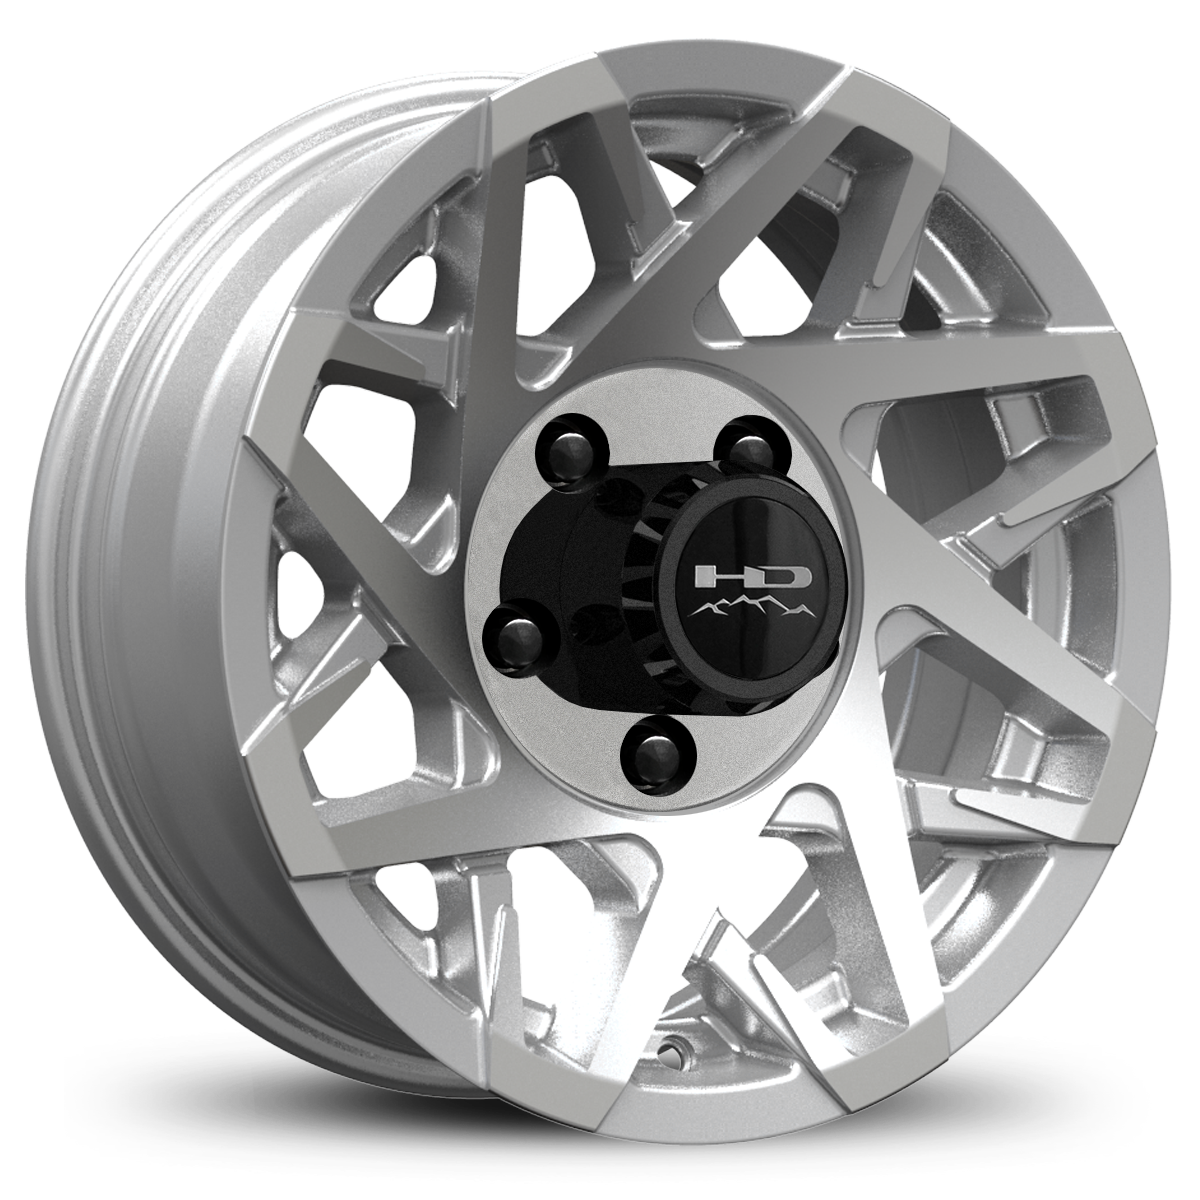 HD Off-Road Canyon Custom Trailer Wheel Rims in 15x6.0  15x6 Gloss Silver Machined Face with Center Cap & Logo fits 5x4.50 / 5x114.3 Axle Boat, Car, RV, Travel, Concession, Horse, Utility, Lawn & Garden, & Landscaping.